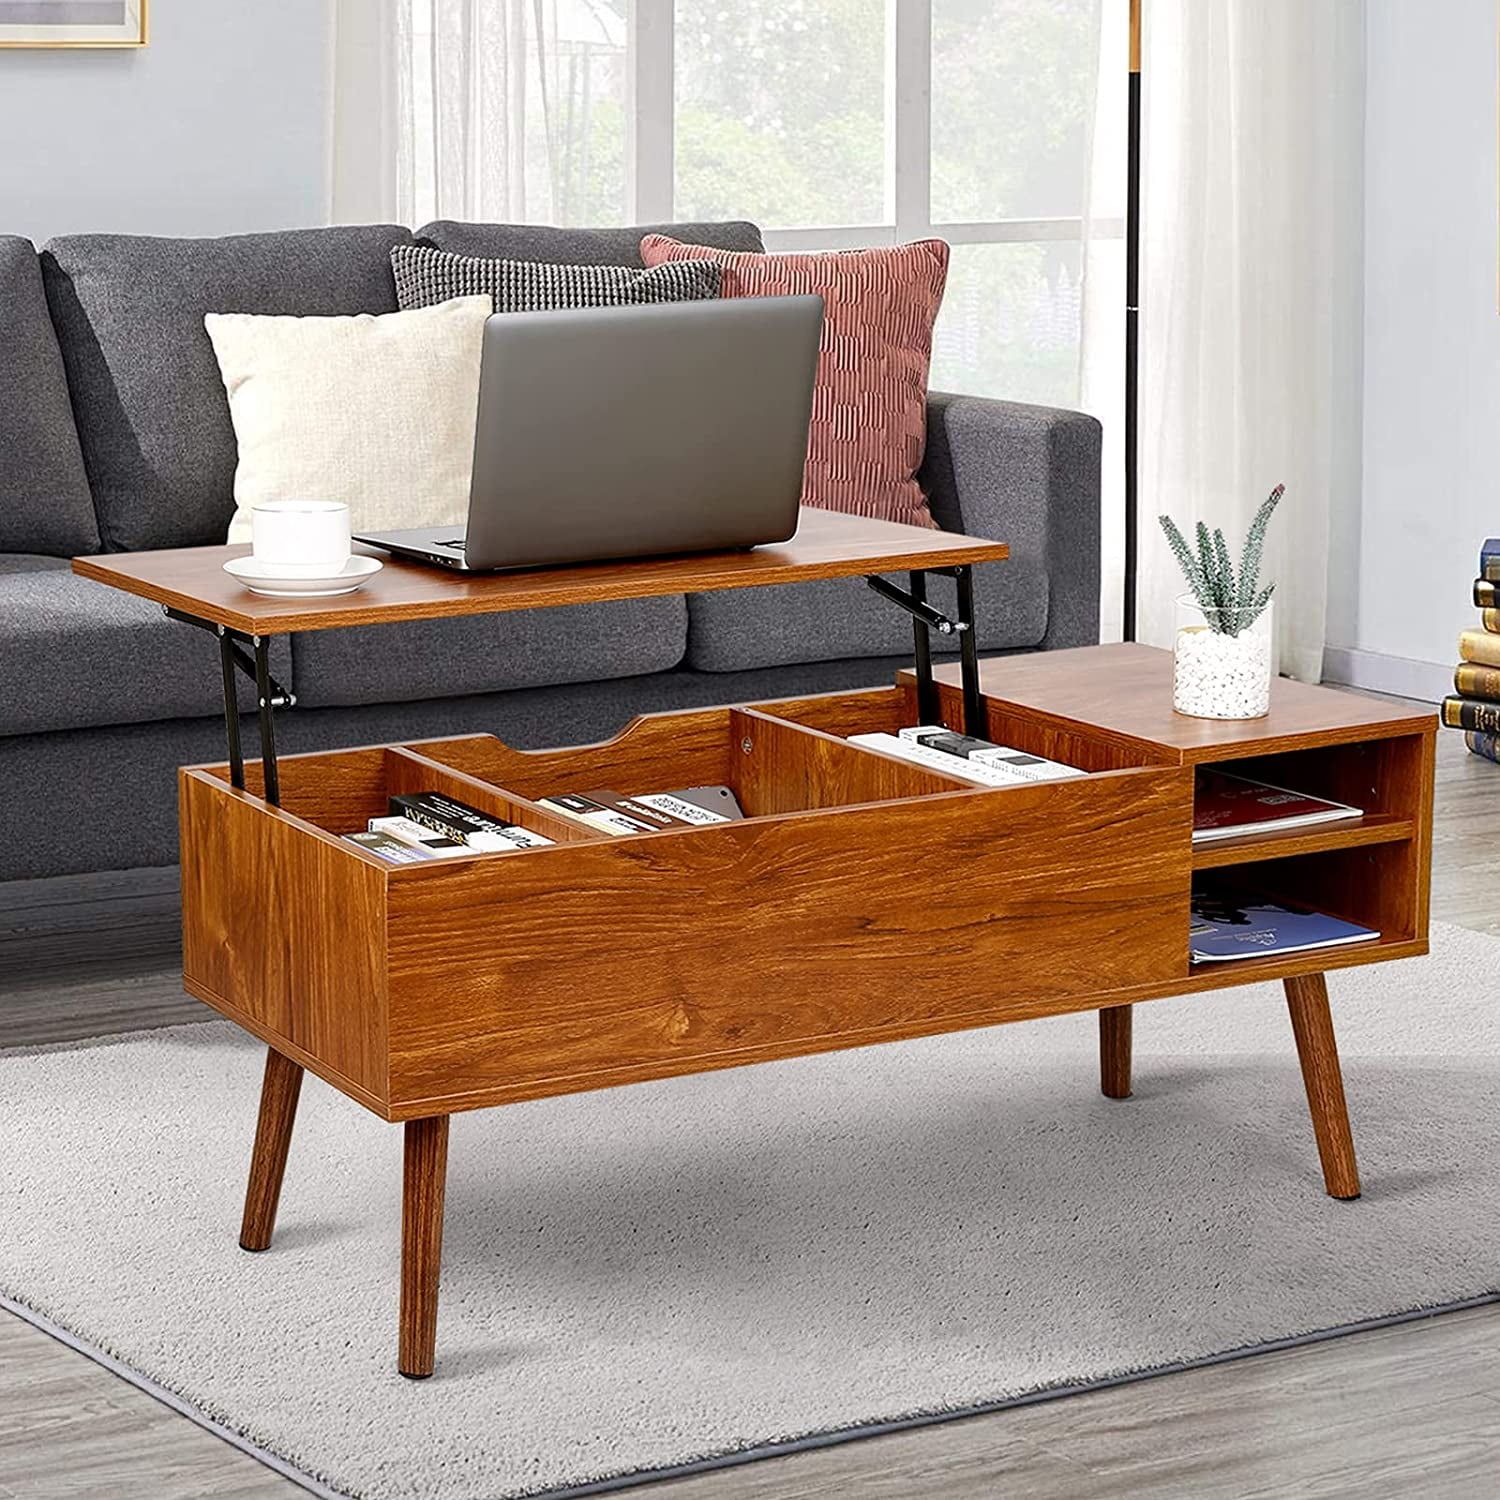 Modern Lift Top Coffee Table With Hidden Compartment Storage,adjustable Inside Modern Coffee Tables With Hidden Storage Compartments (Gallery 1 of 20)